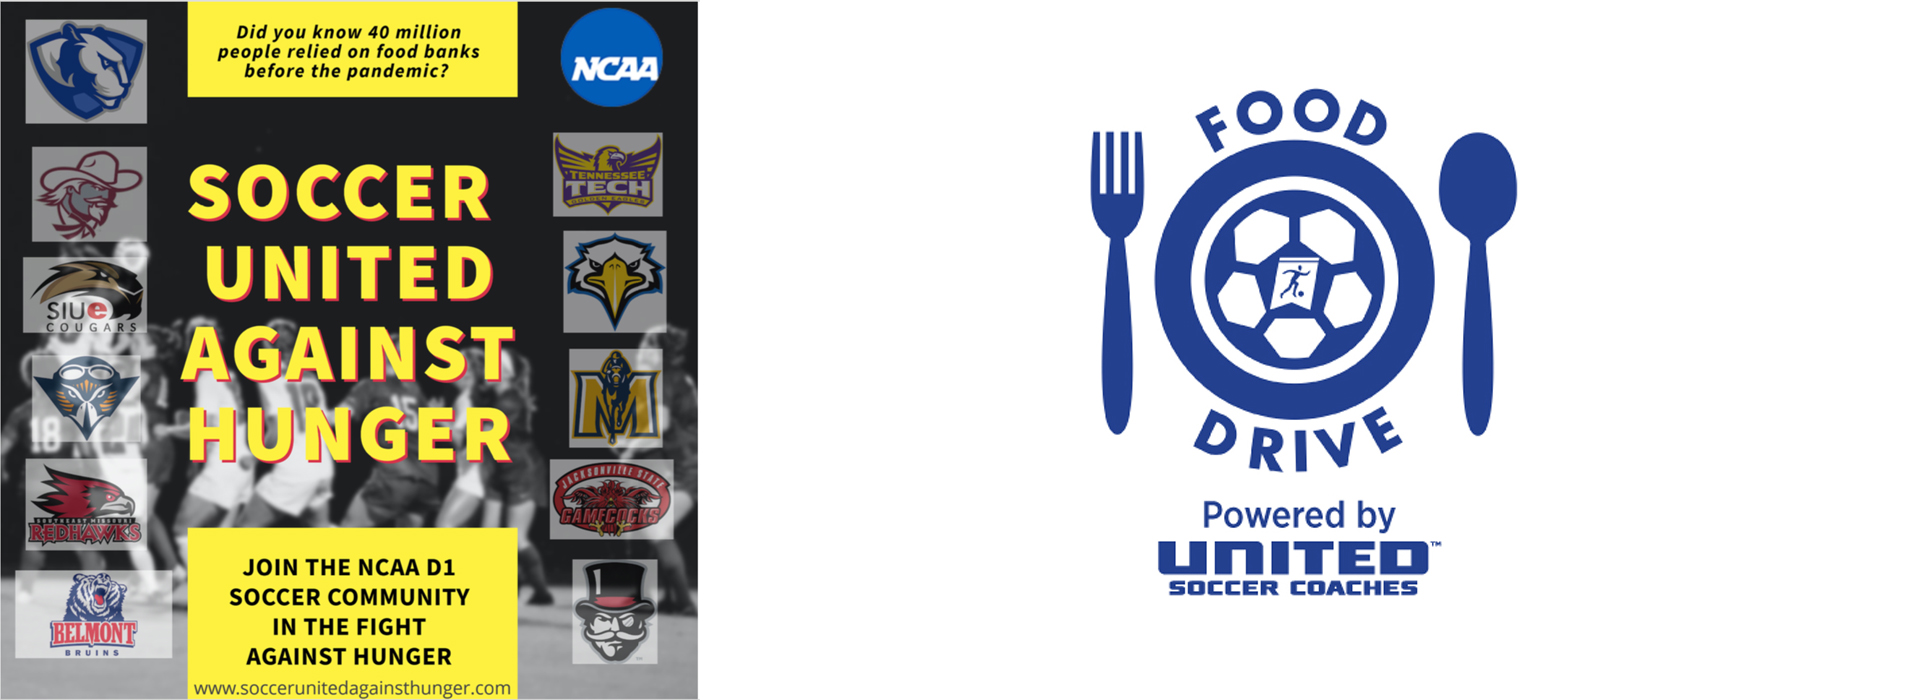 Tech soccer to support local and national food banks via Soccer United Against Hunger